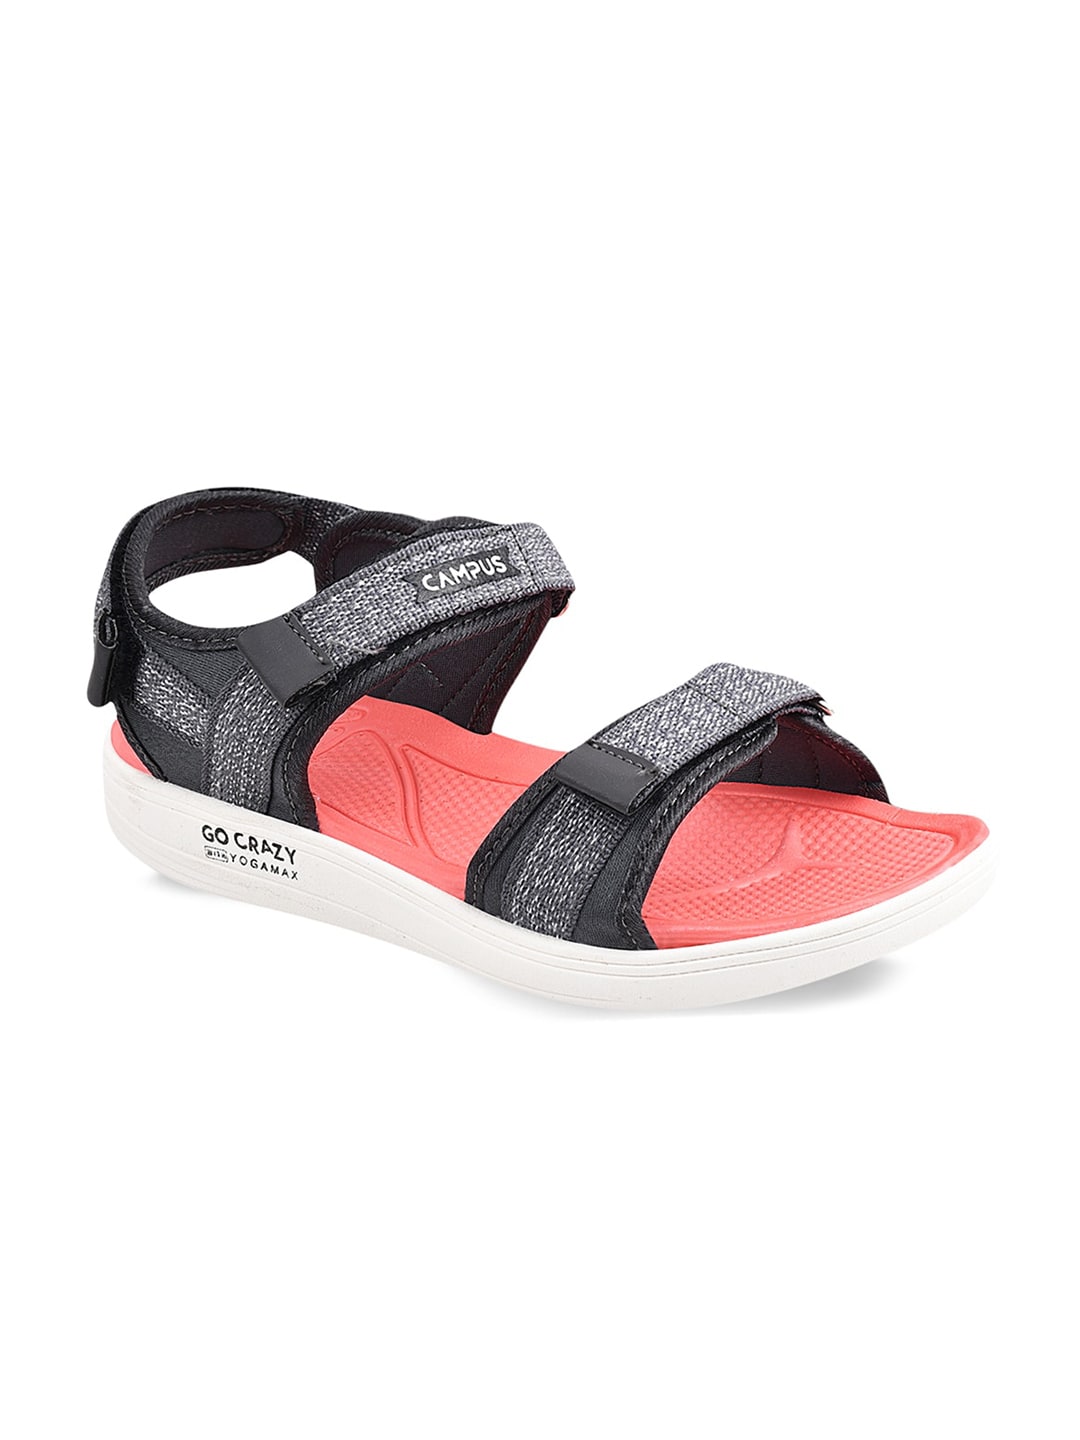 Campus Women Grey & Peach Patterned Sports Sandals Price in India